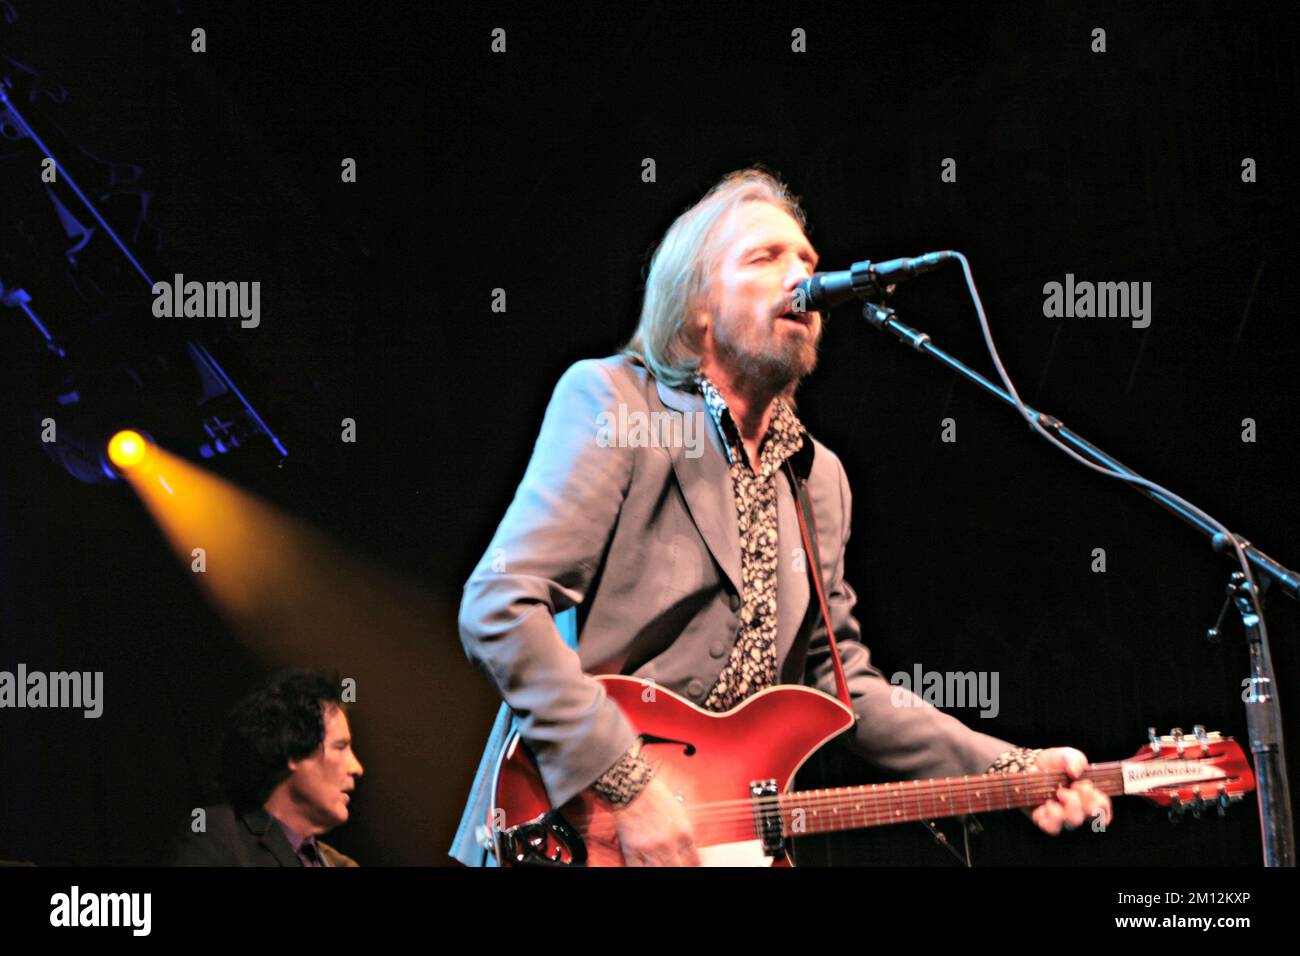 The Bonnaroo Music and Arts Festival - Tom Petty and the Heartbreakers in concert Stock Photo